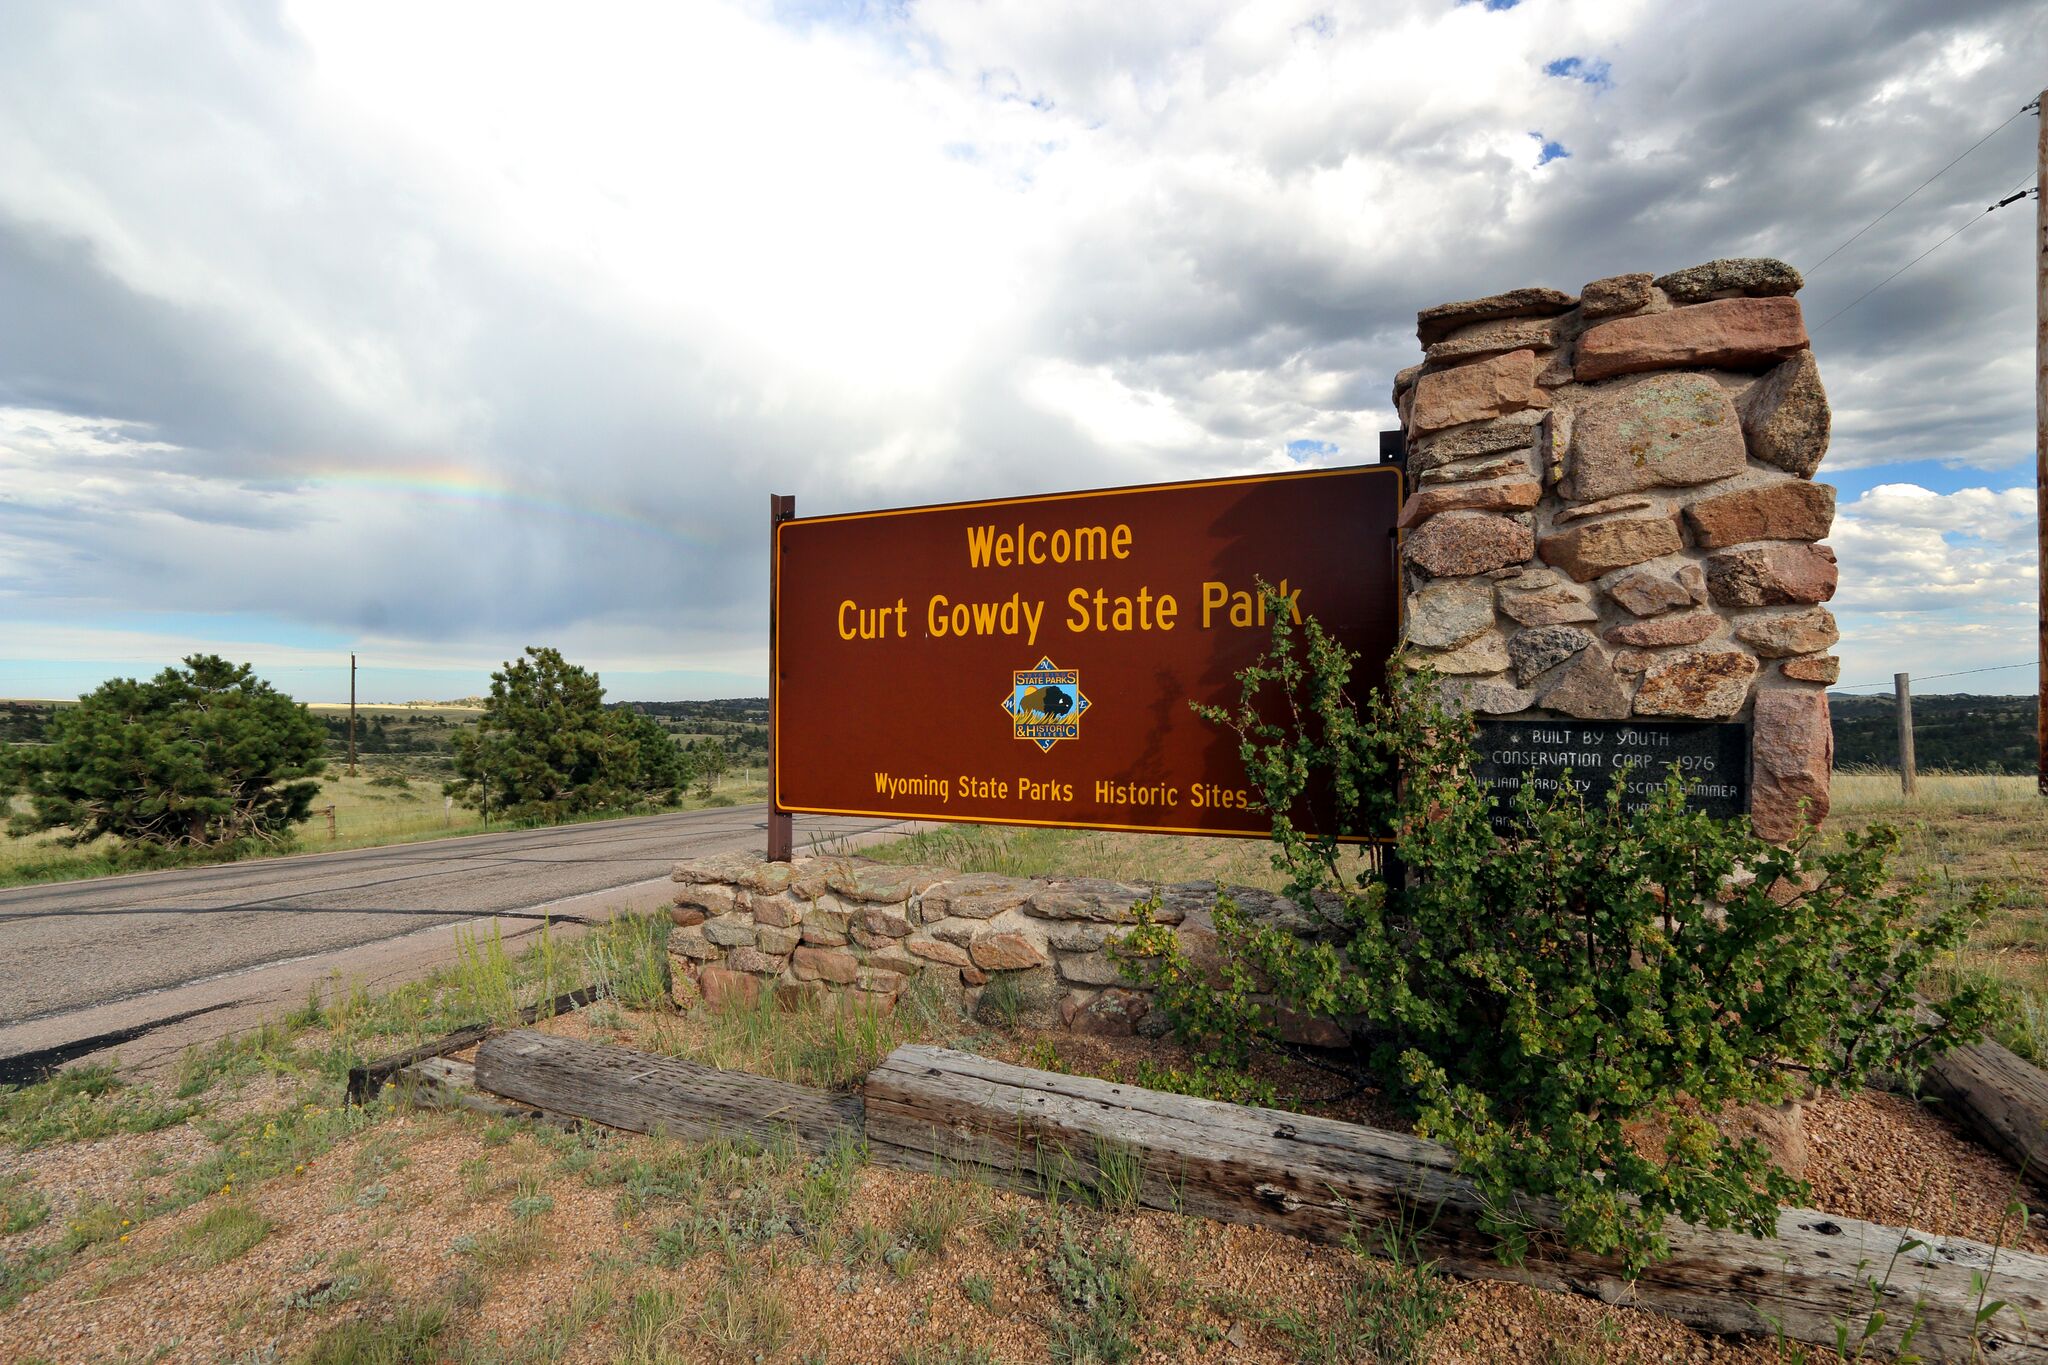 Curt gowdy state park camping